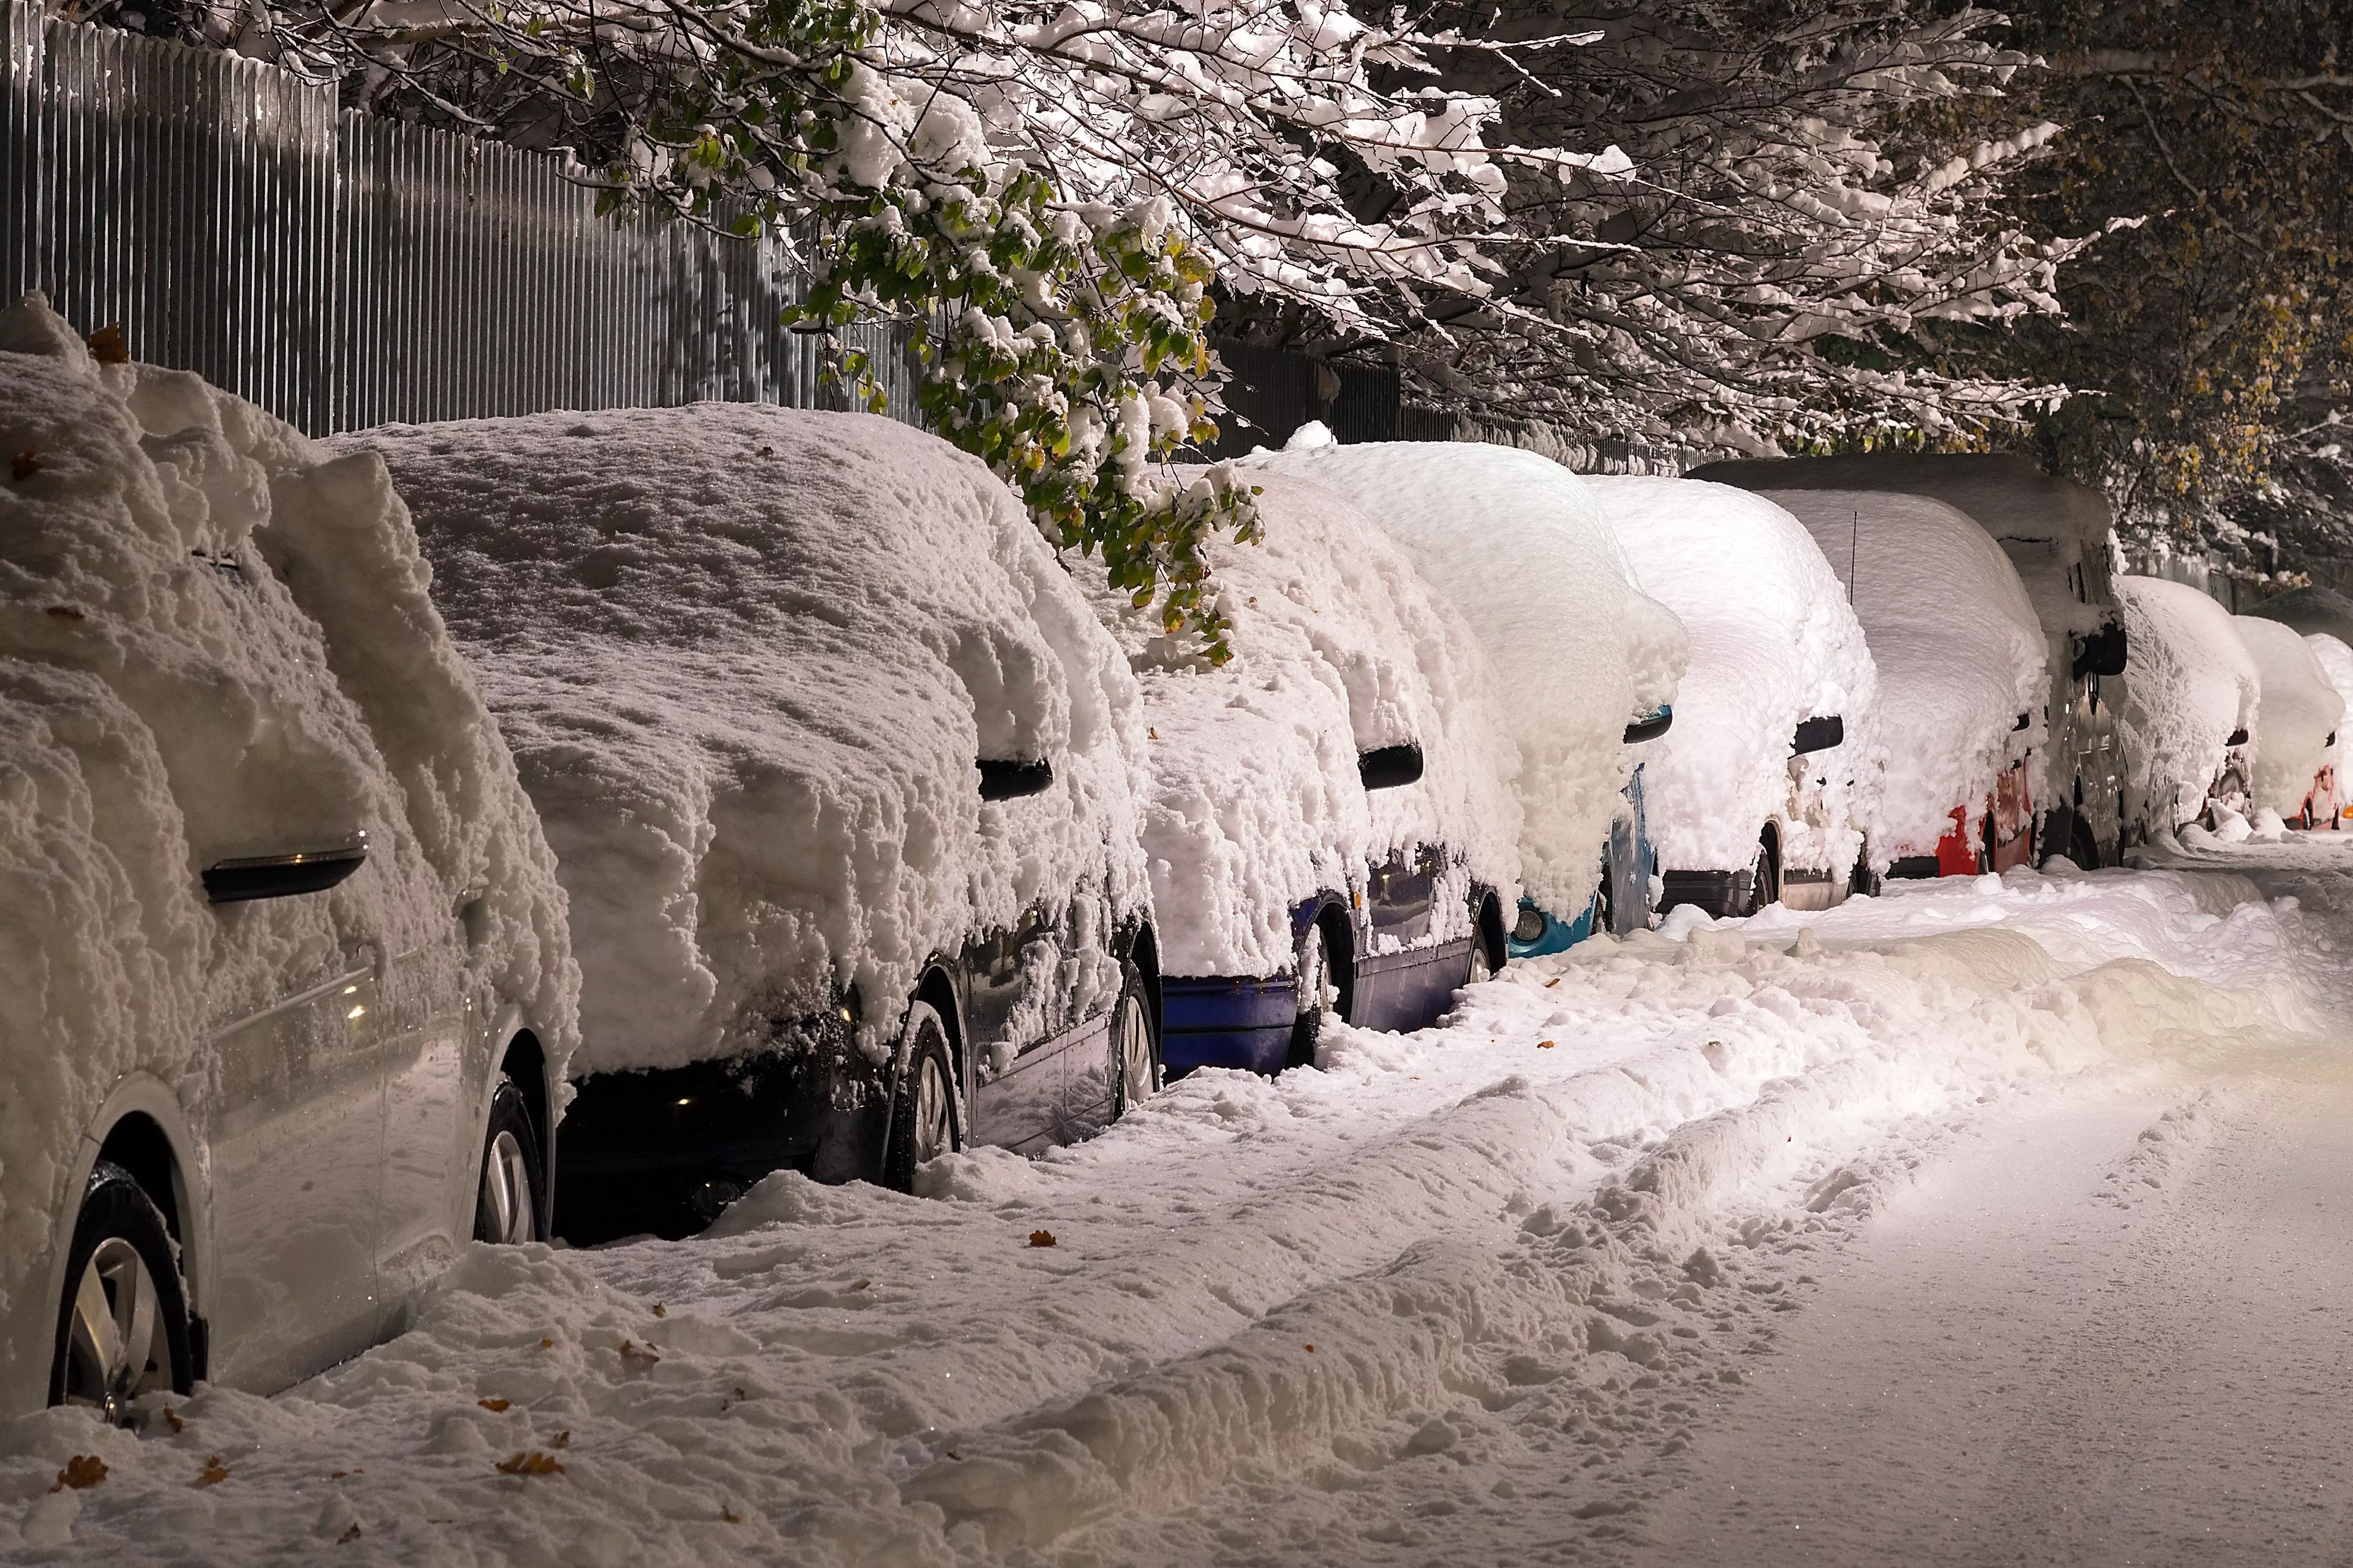 The UK could see snowfall on Tuesday night into the early hours of Wednesday. (